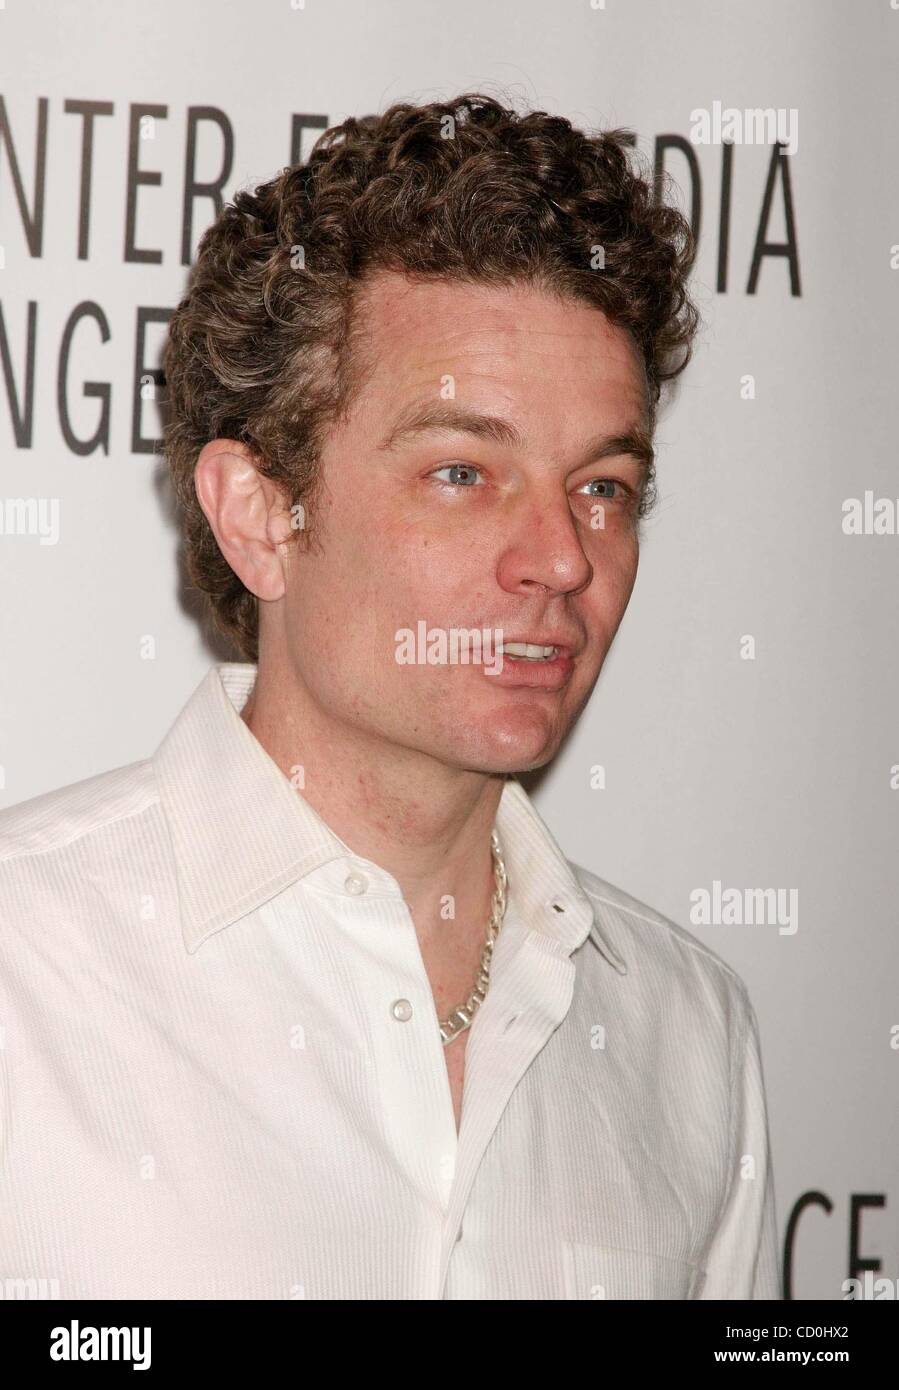 Mar. 20, 2008 - Hollywood, California, U.S. - I13062CHW.'' BUFFY THE VAMPIRE SLAYER'' REUNION AT THE PALEY CENTER FOR MEDIA'S 25TH ANNUAL WILLIAM S. PALEY TELEVISION FESTIVAL .ARCLIGHT CINEMAS, HOLLYWOOD, CA .03/20/08.JAMES MARSTERS (Credit Image: Â© Clinton Wallace/Globe Photos/ZUMAPRESS.com) Stock Photo